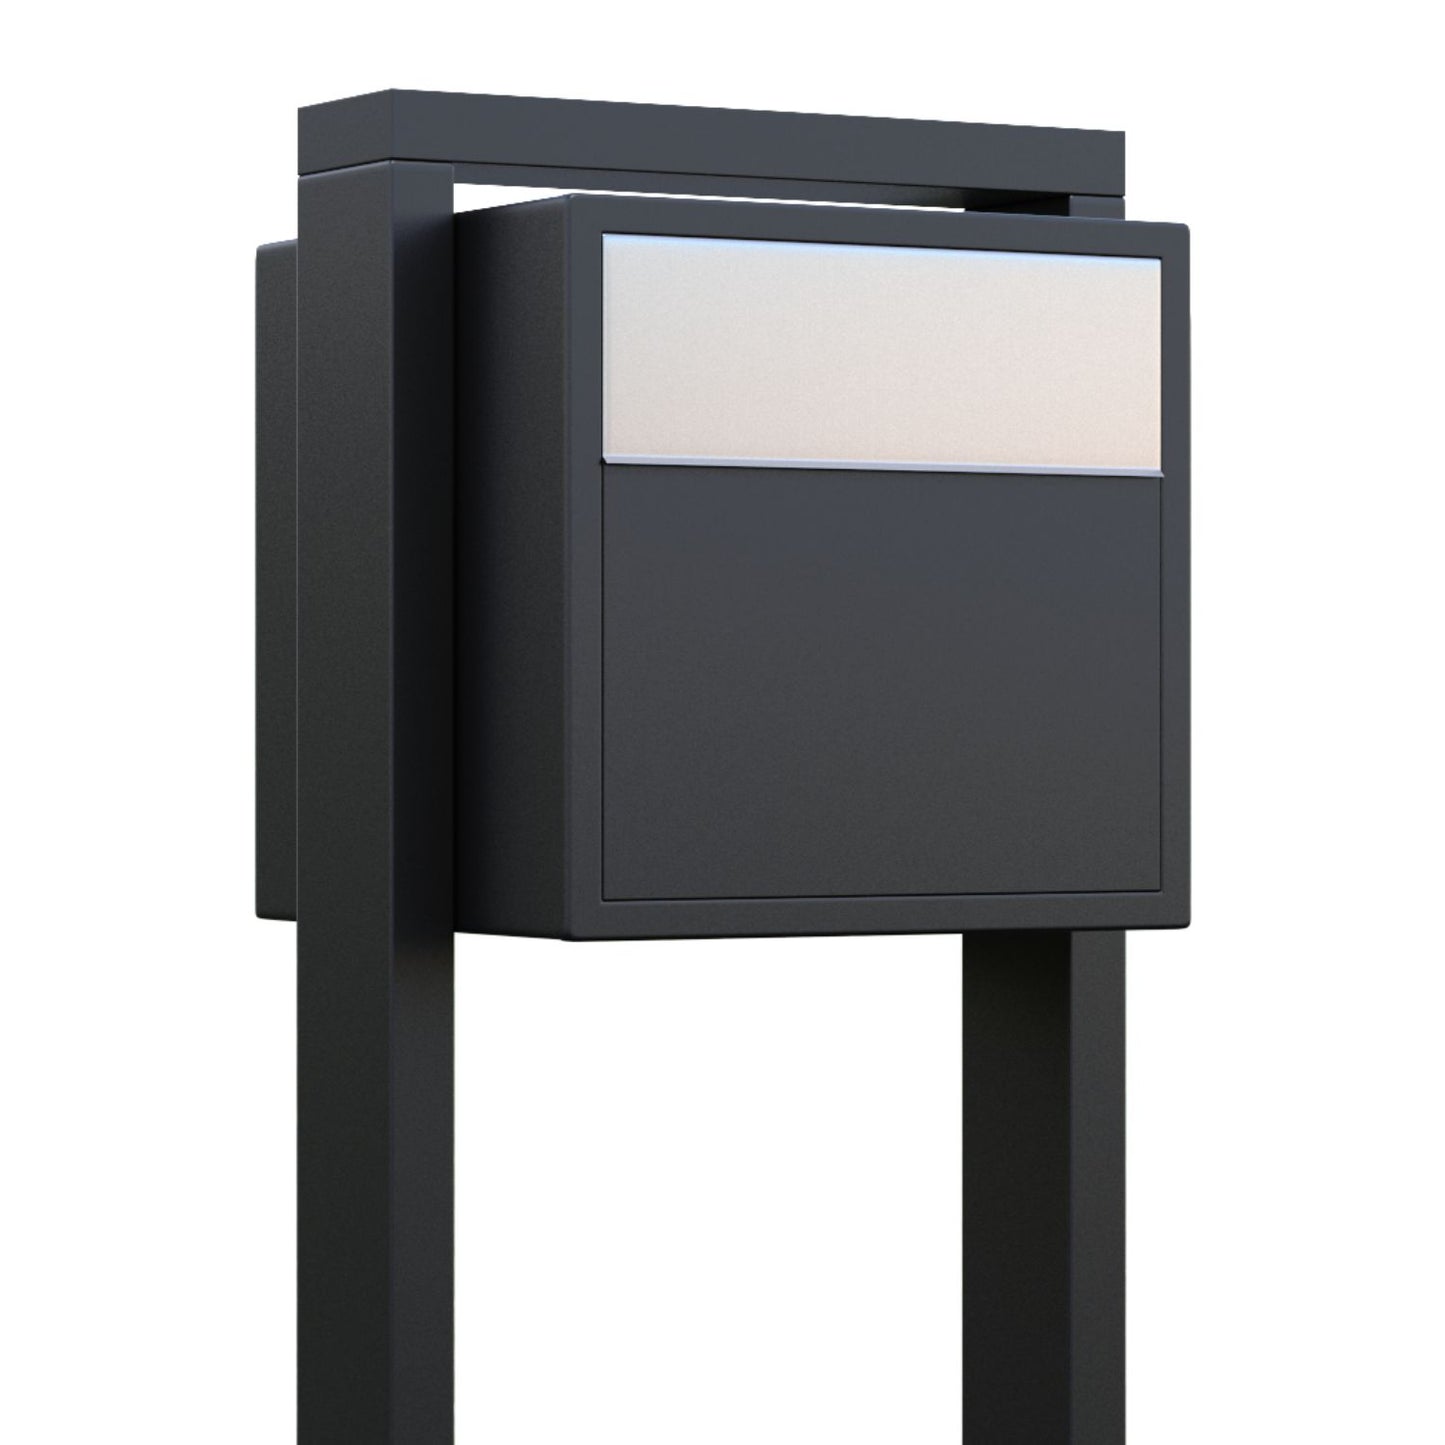 SOPRANO by Bravios - Modern post-mounted anthracite mailbox with stainless steel flap